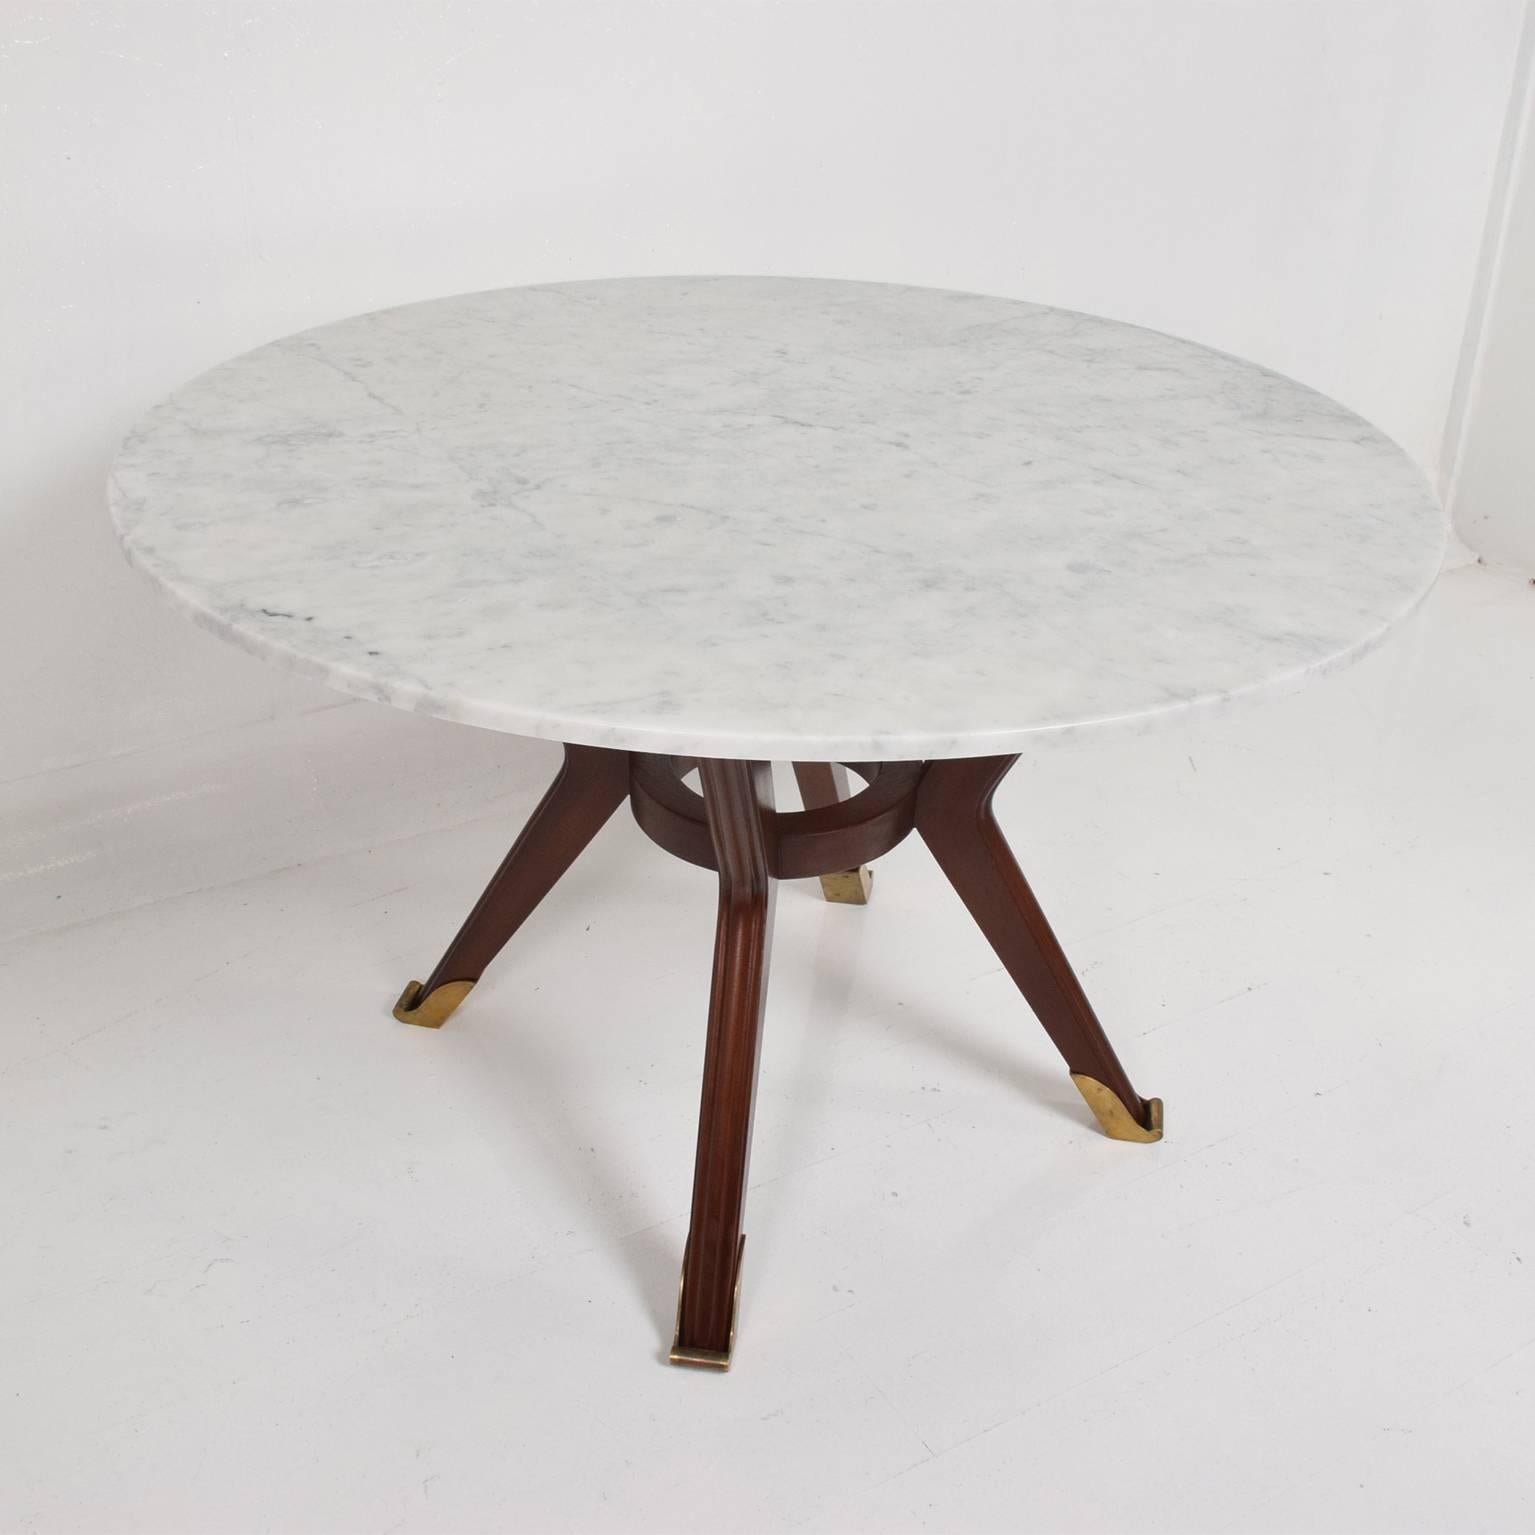 Mexican Modernist Round Dining Table Attributed to Arturo Pani 2